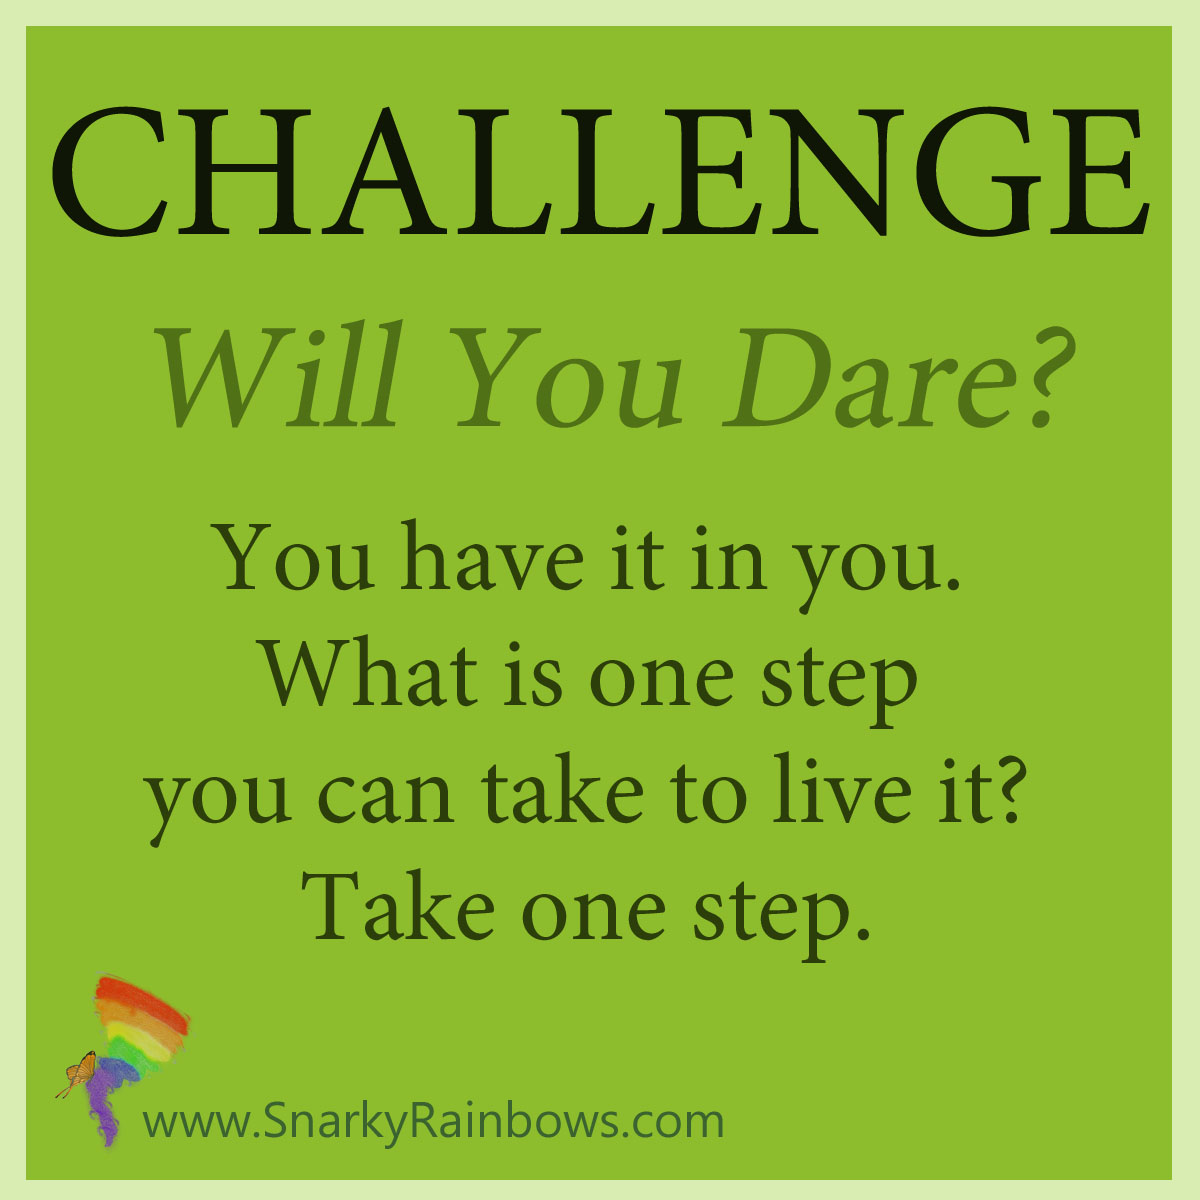 Challenge for October 30, 2019 - will you dare